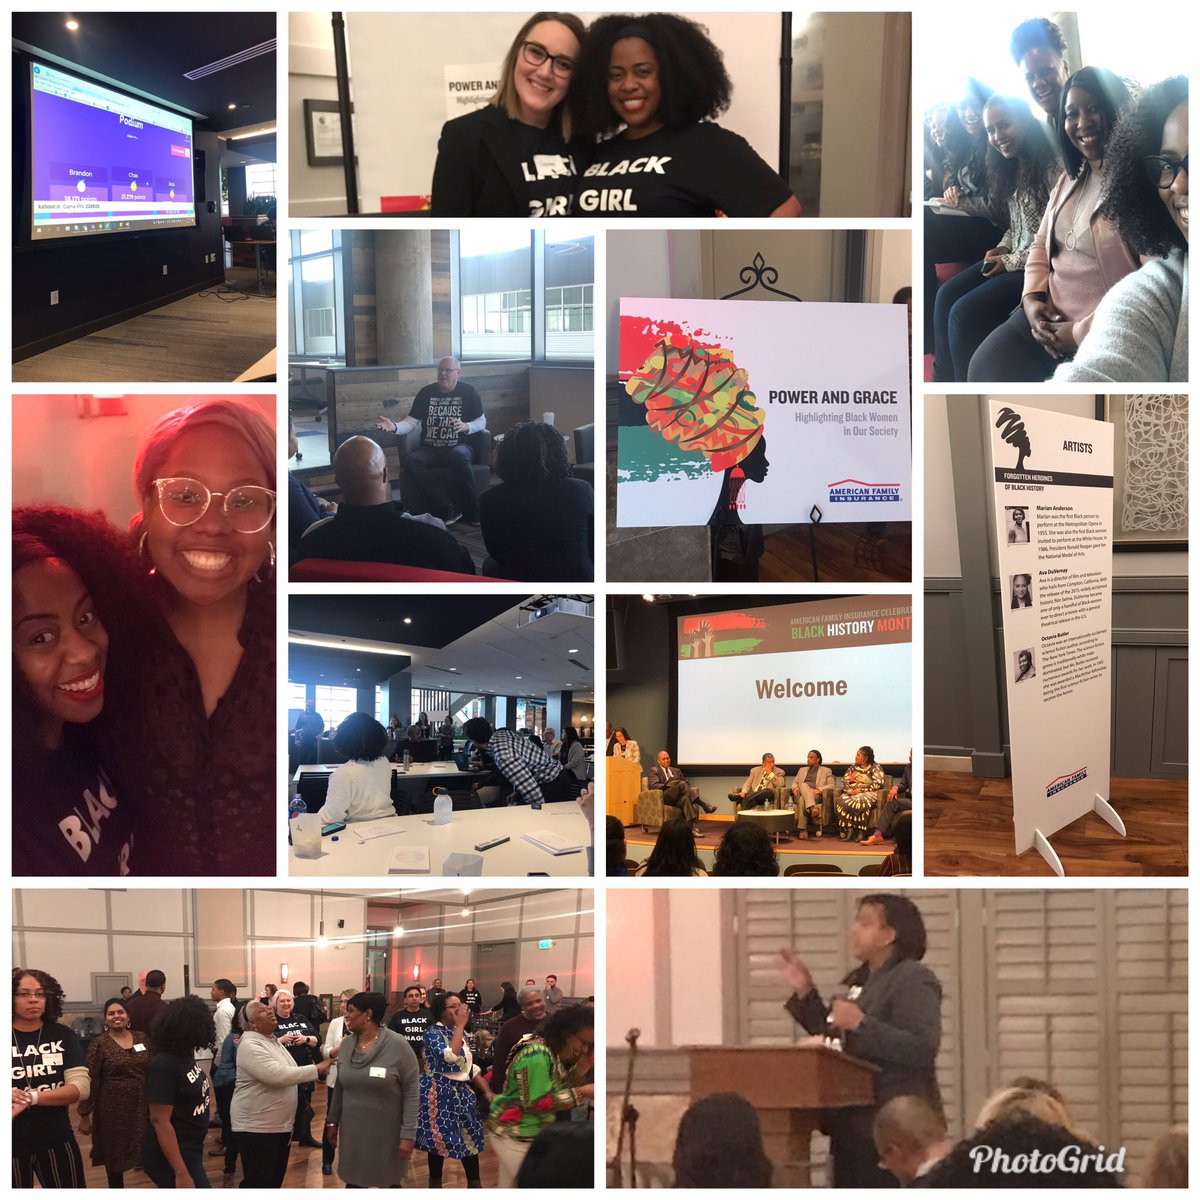 February is over, but I’d be remissed if I didn’t say that AmFam honored Black History Month with gumption, flair and inclusiveness! We educated, we celebrated #solidarity #blackgirlmagic #powerandgrace #quizbowl #MKE53206 #iwork4amfam #Blackhistory365